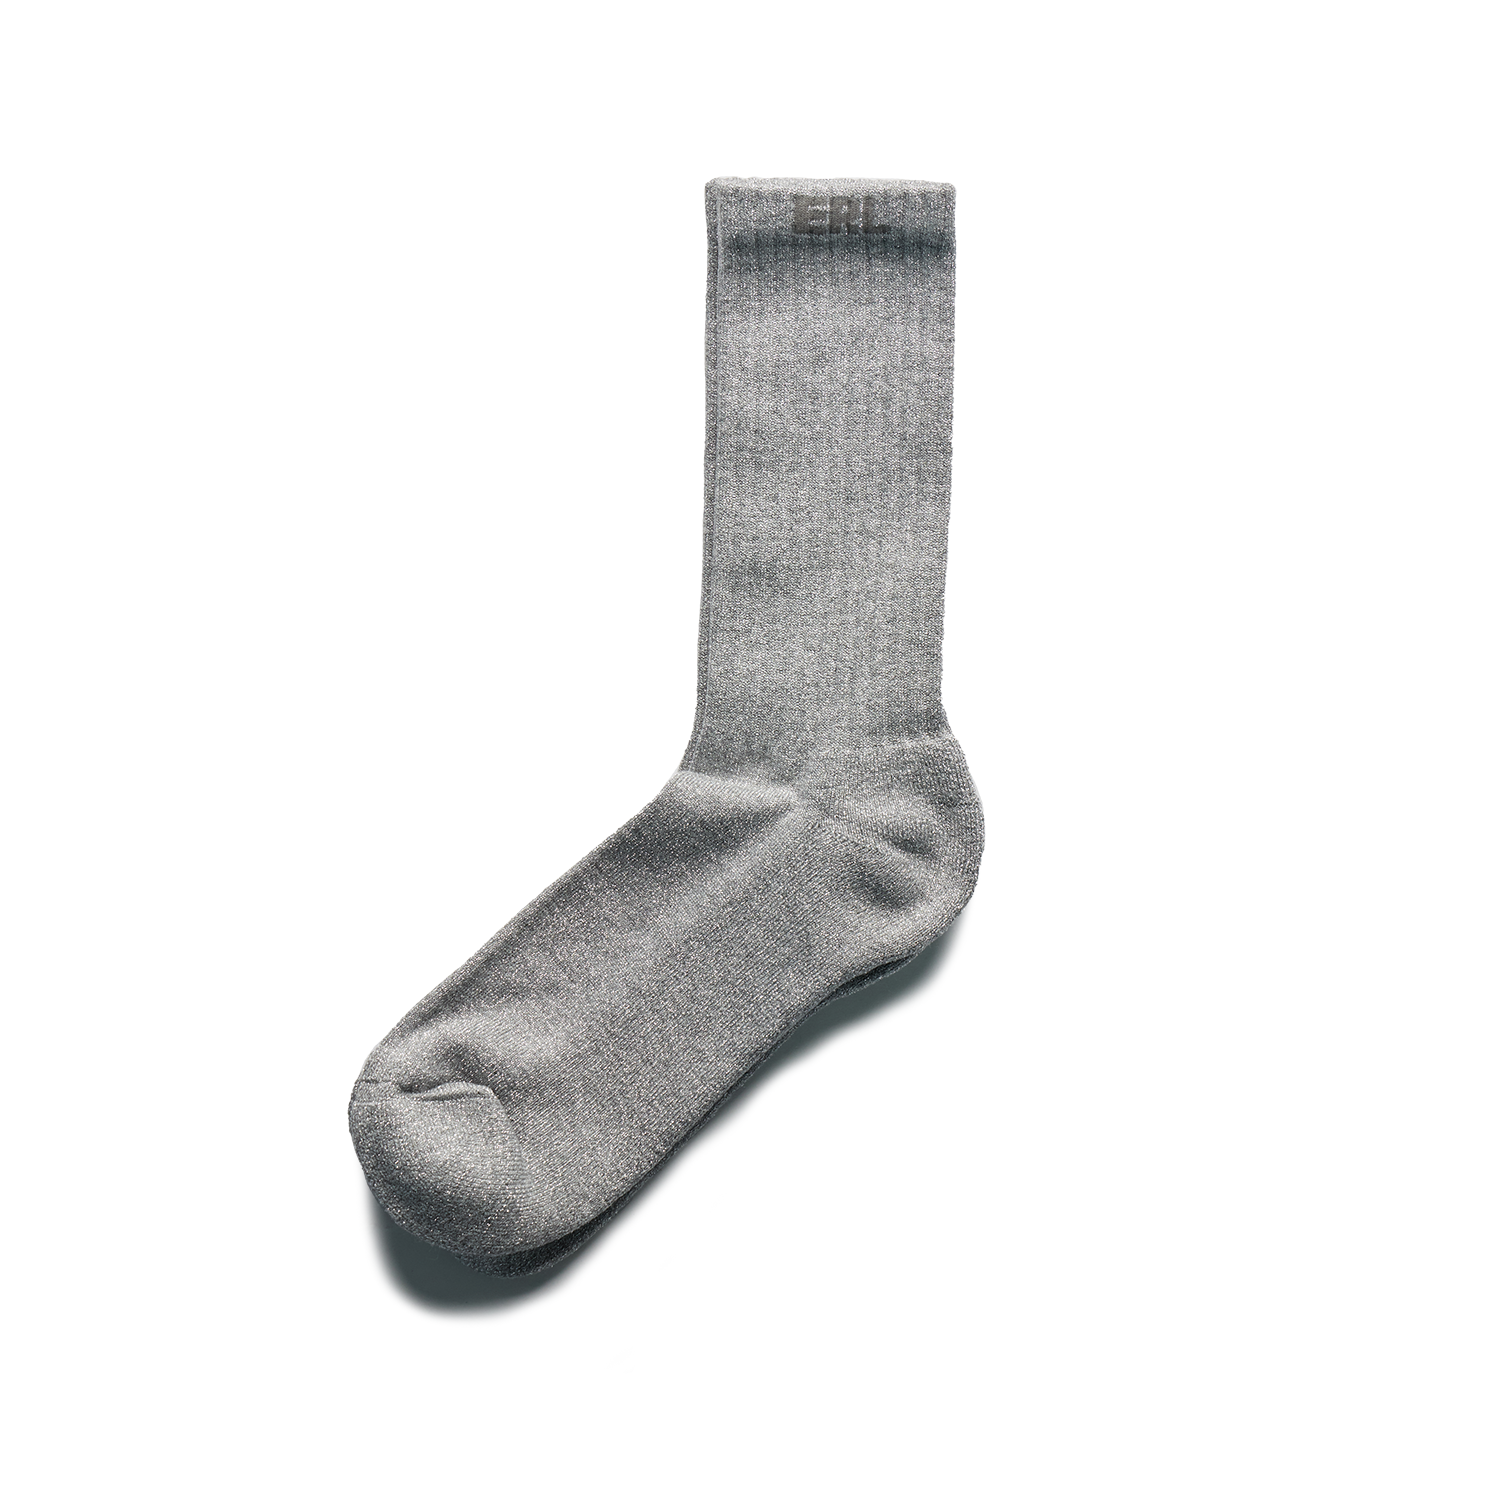 ERL - Lurex ERL Socks product image